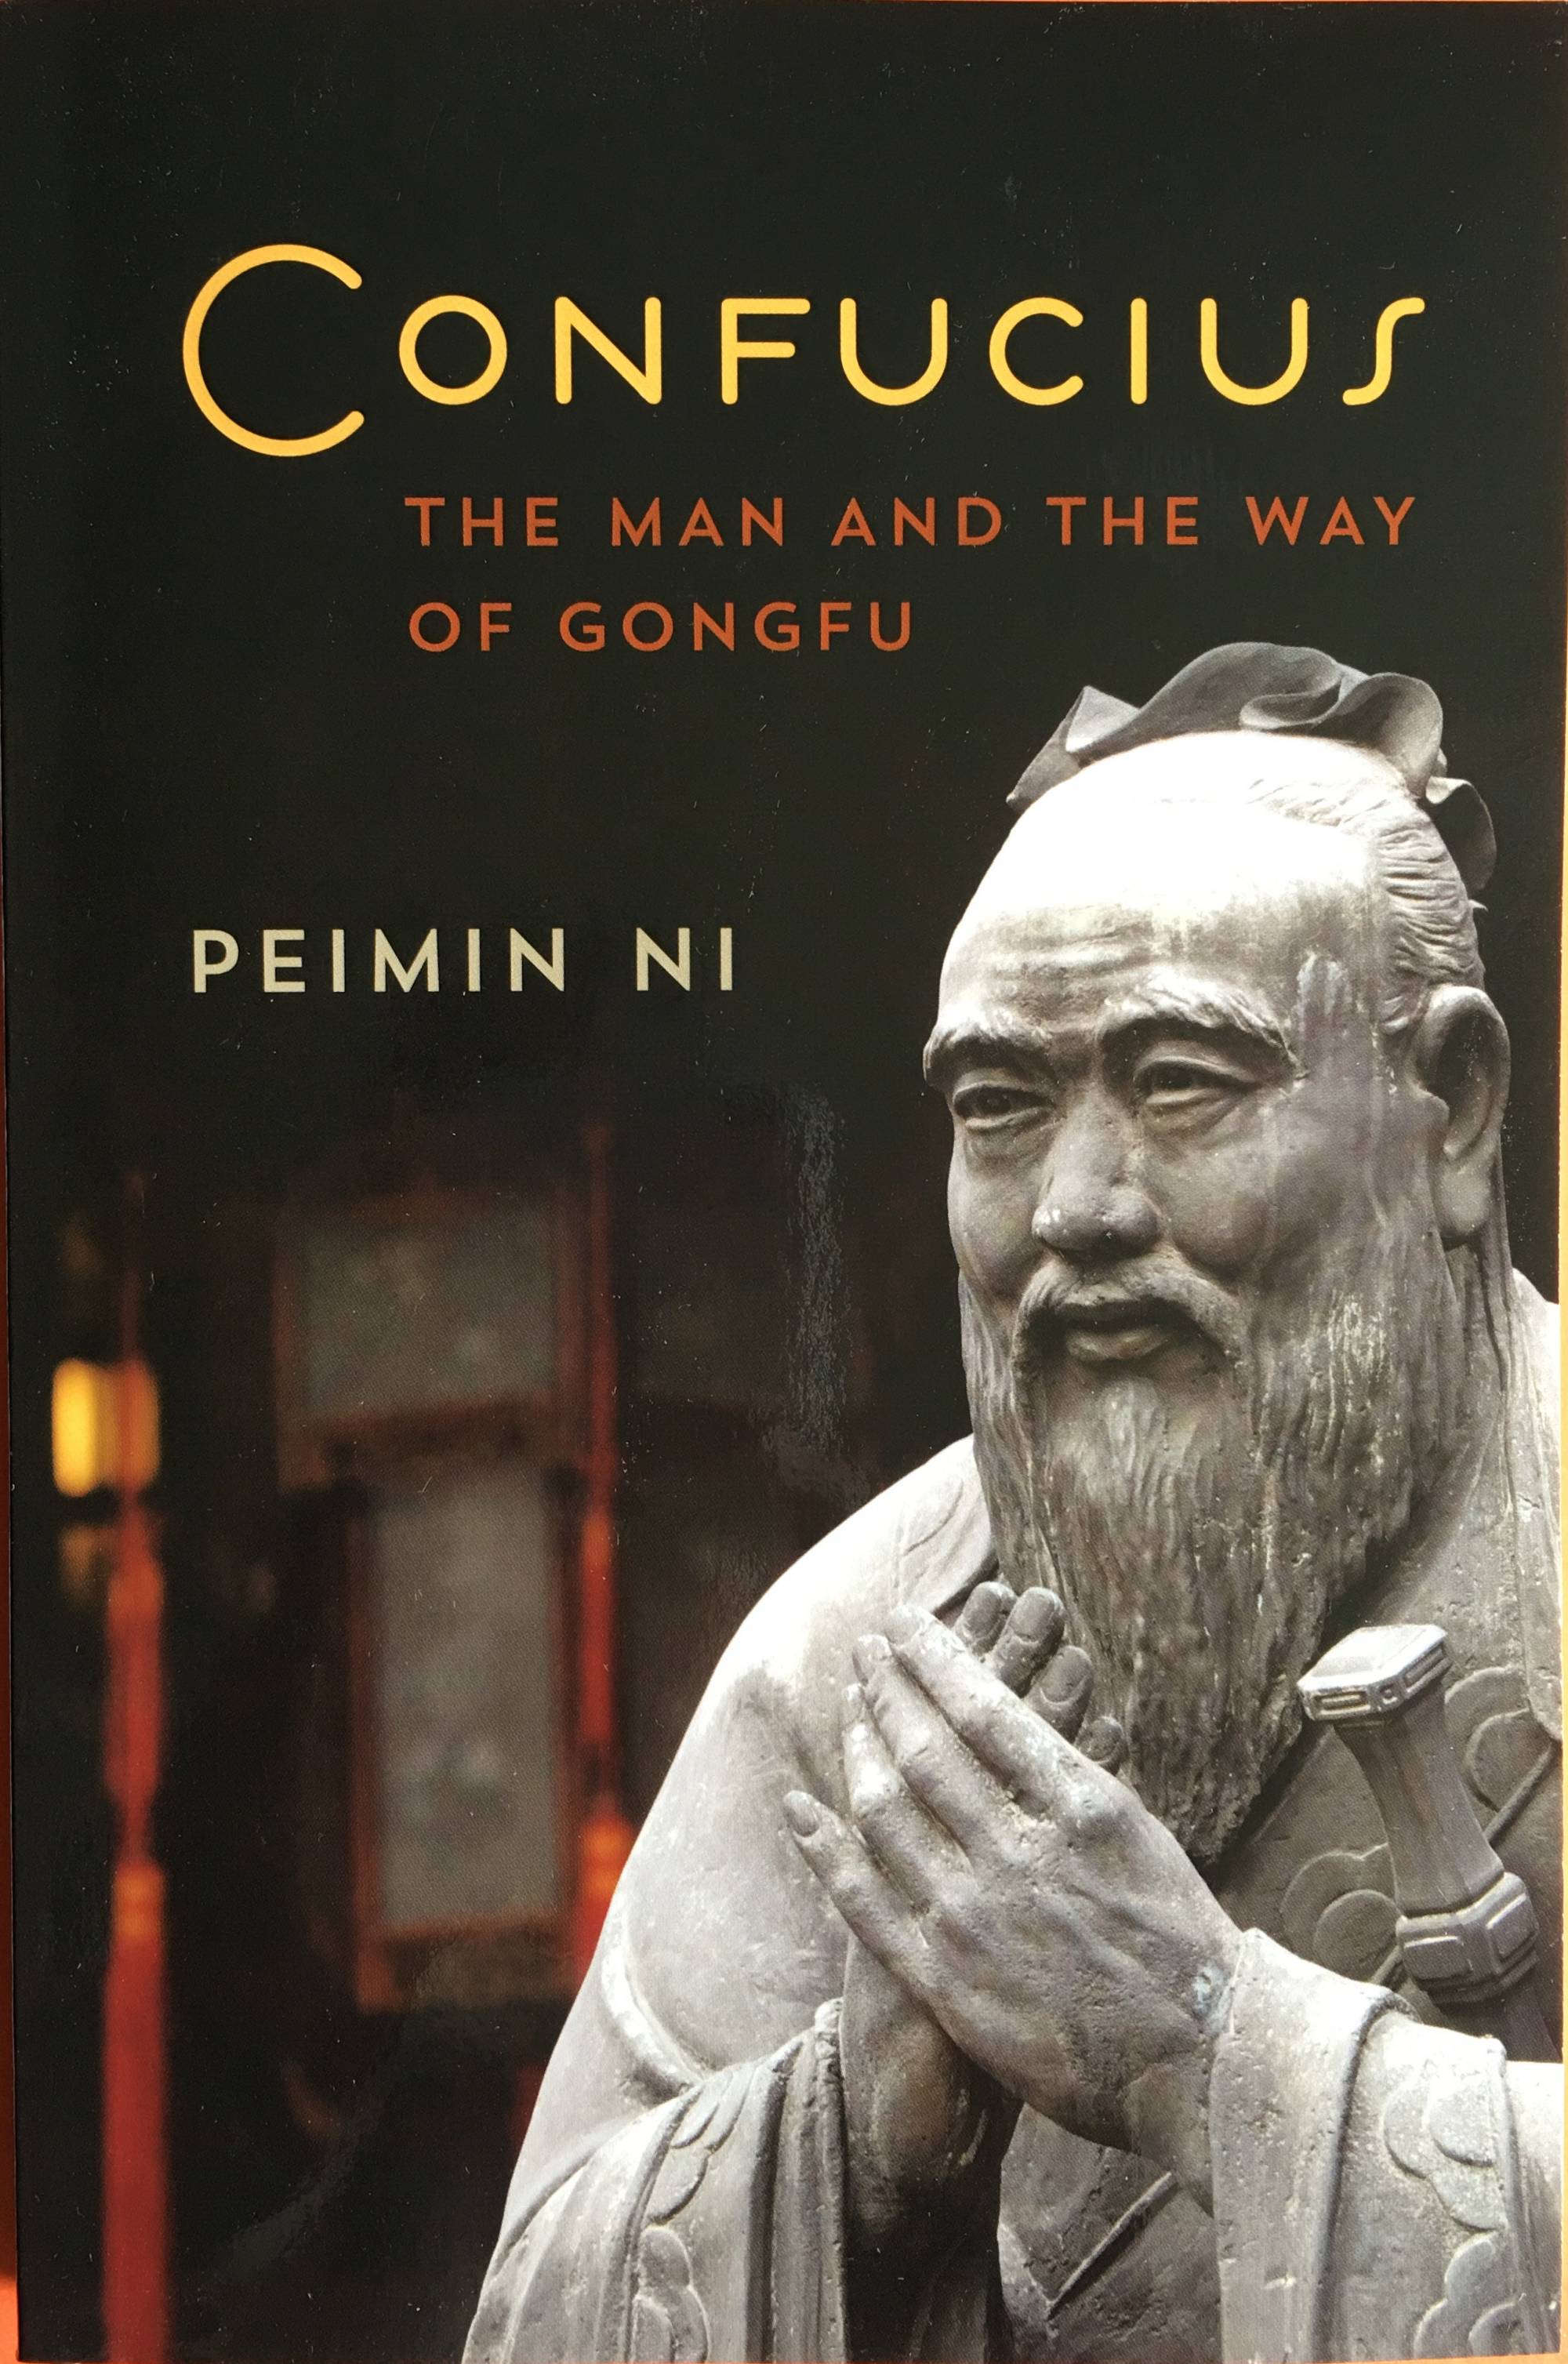 Confucius the man and the way of Gongfu by Peimin Ni